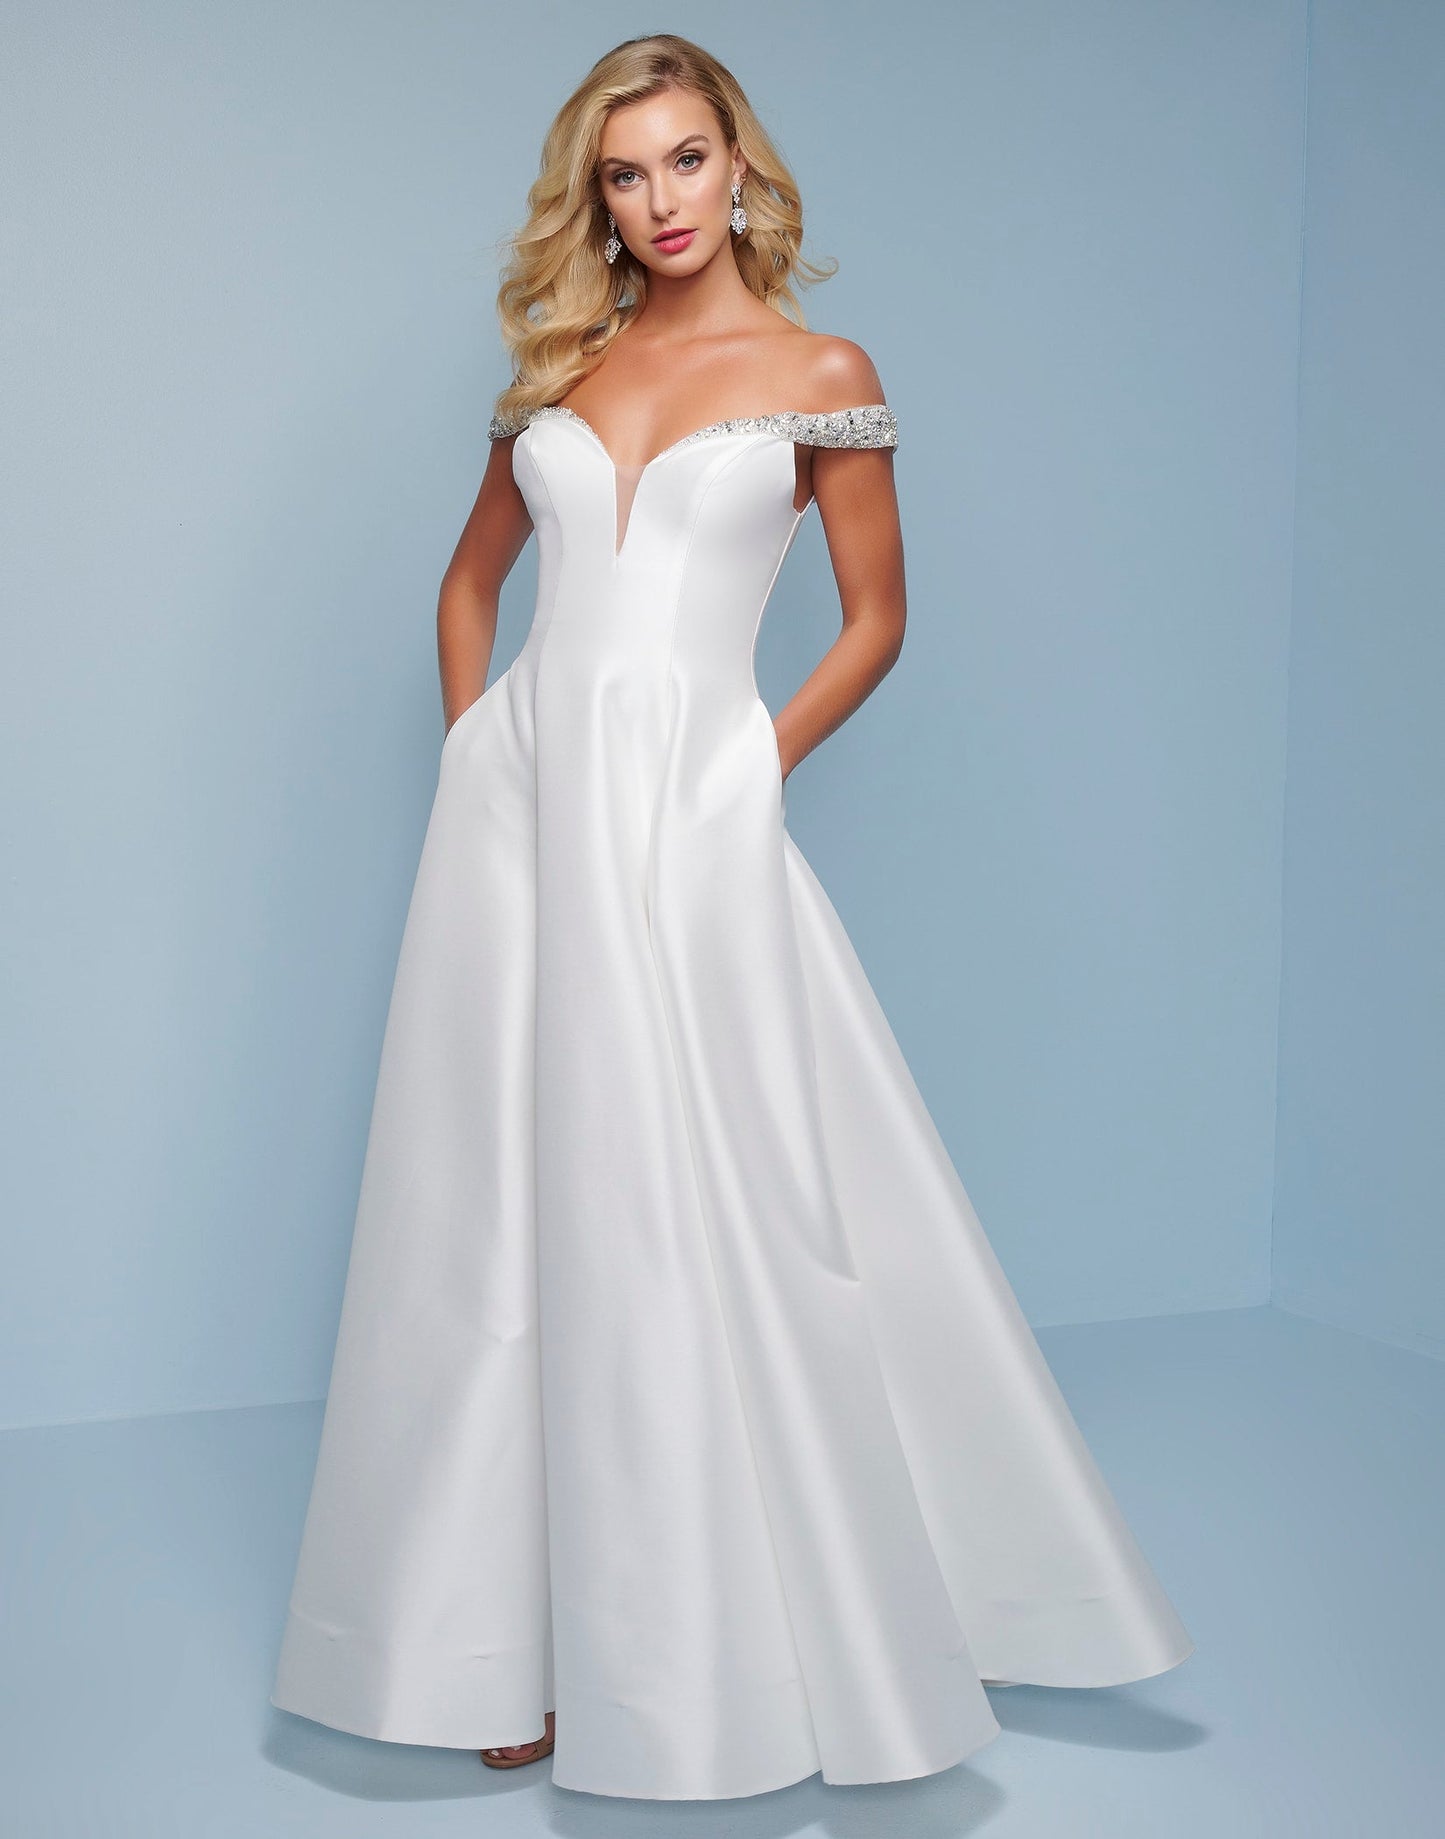 Splash Prom K524 This is an off the shoulder satin A line prom dress with embellished straps.  This long evening pageant gown is made of smooth satin and has an open lace up corset in the back.   Colors White  Sizes  6